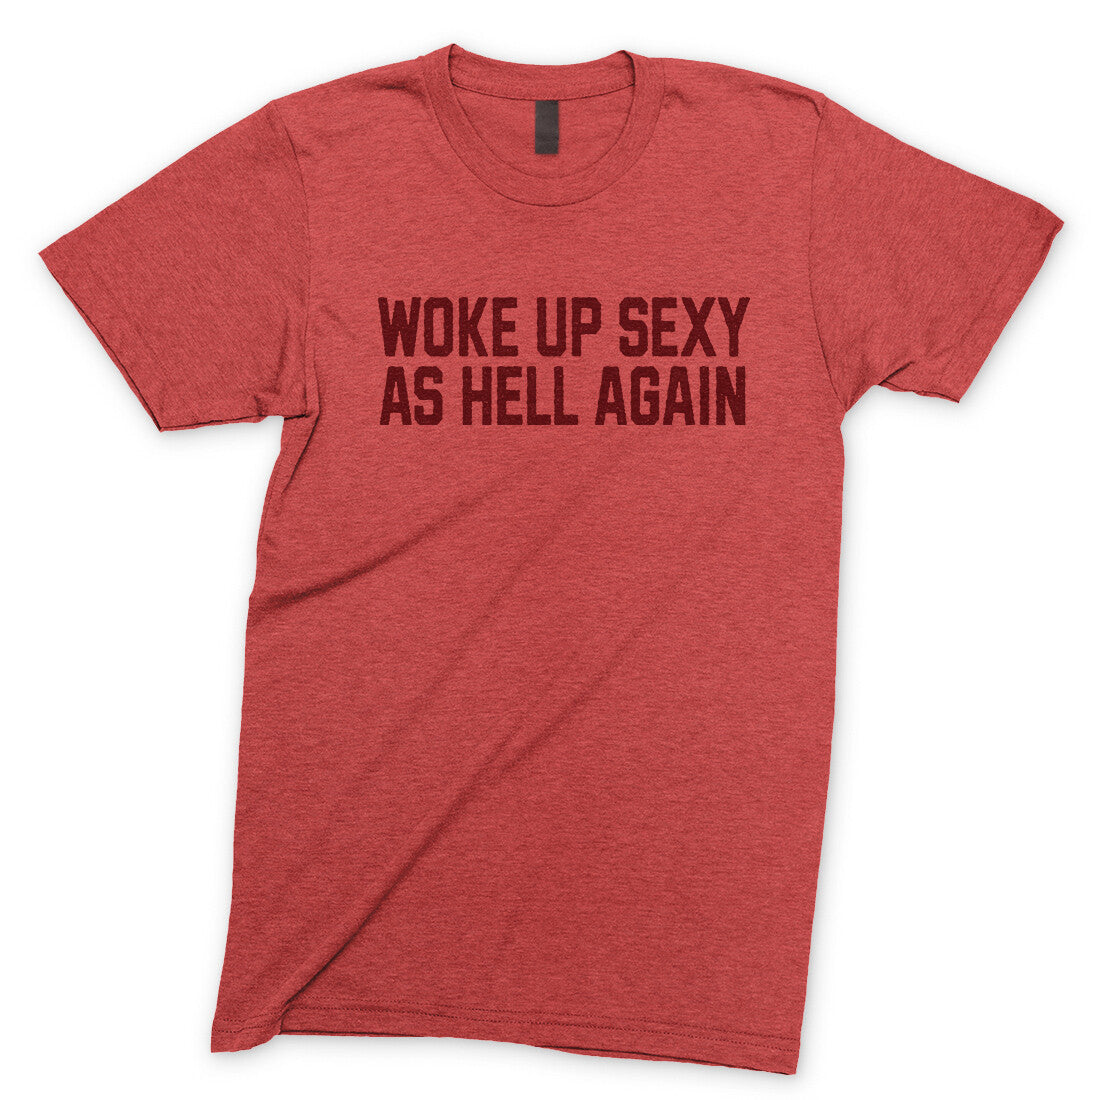 Woke Up Sexy as Hell in Heather Red Color